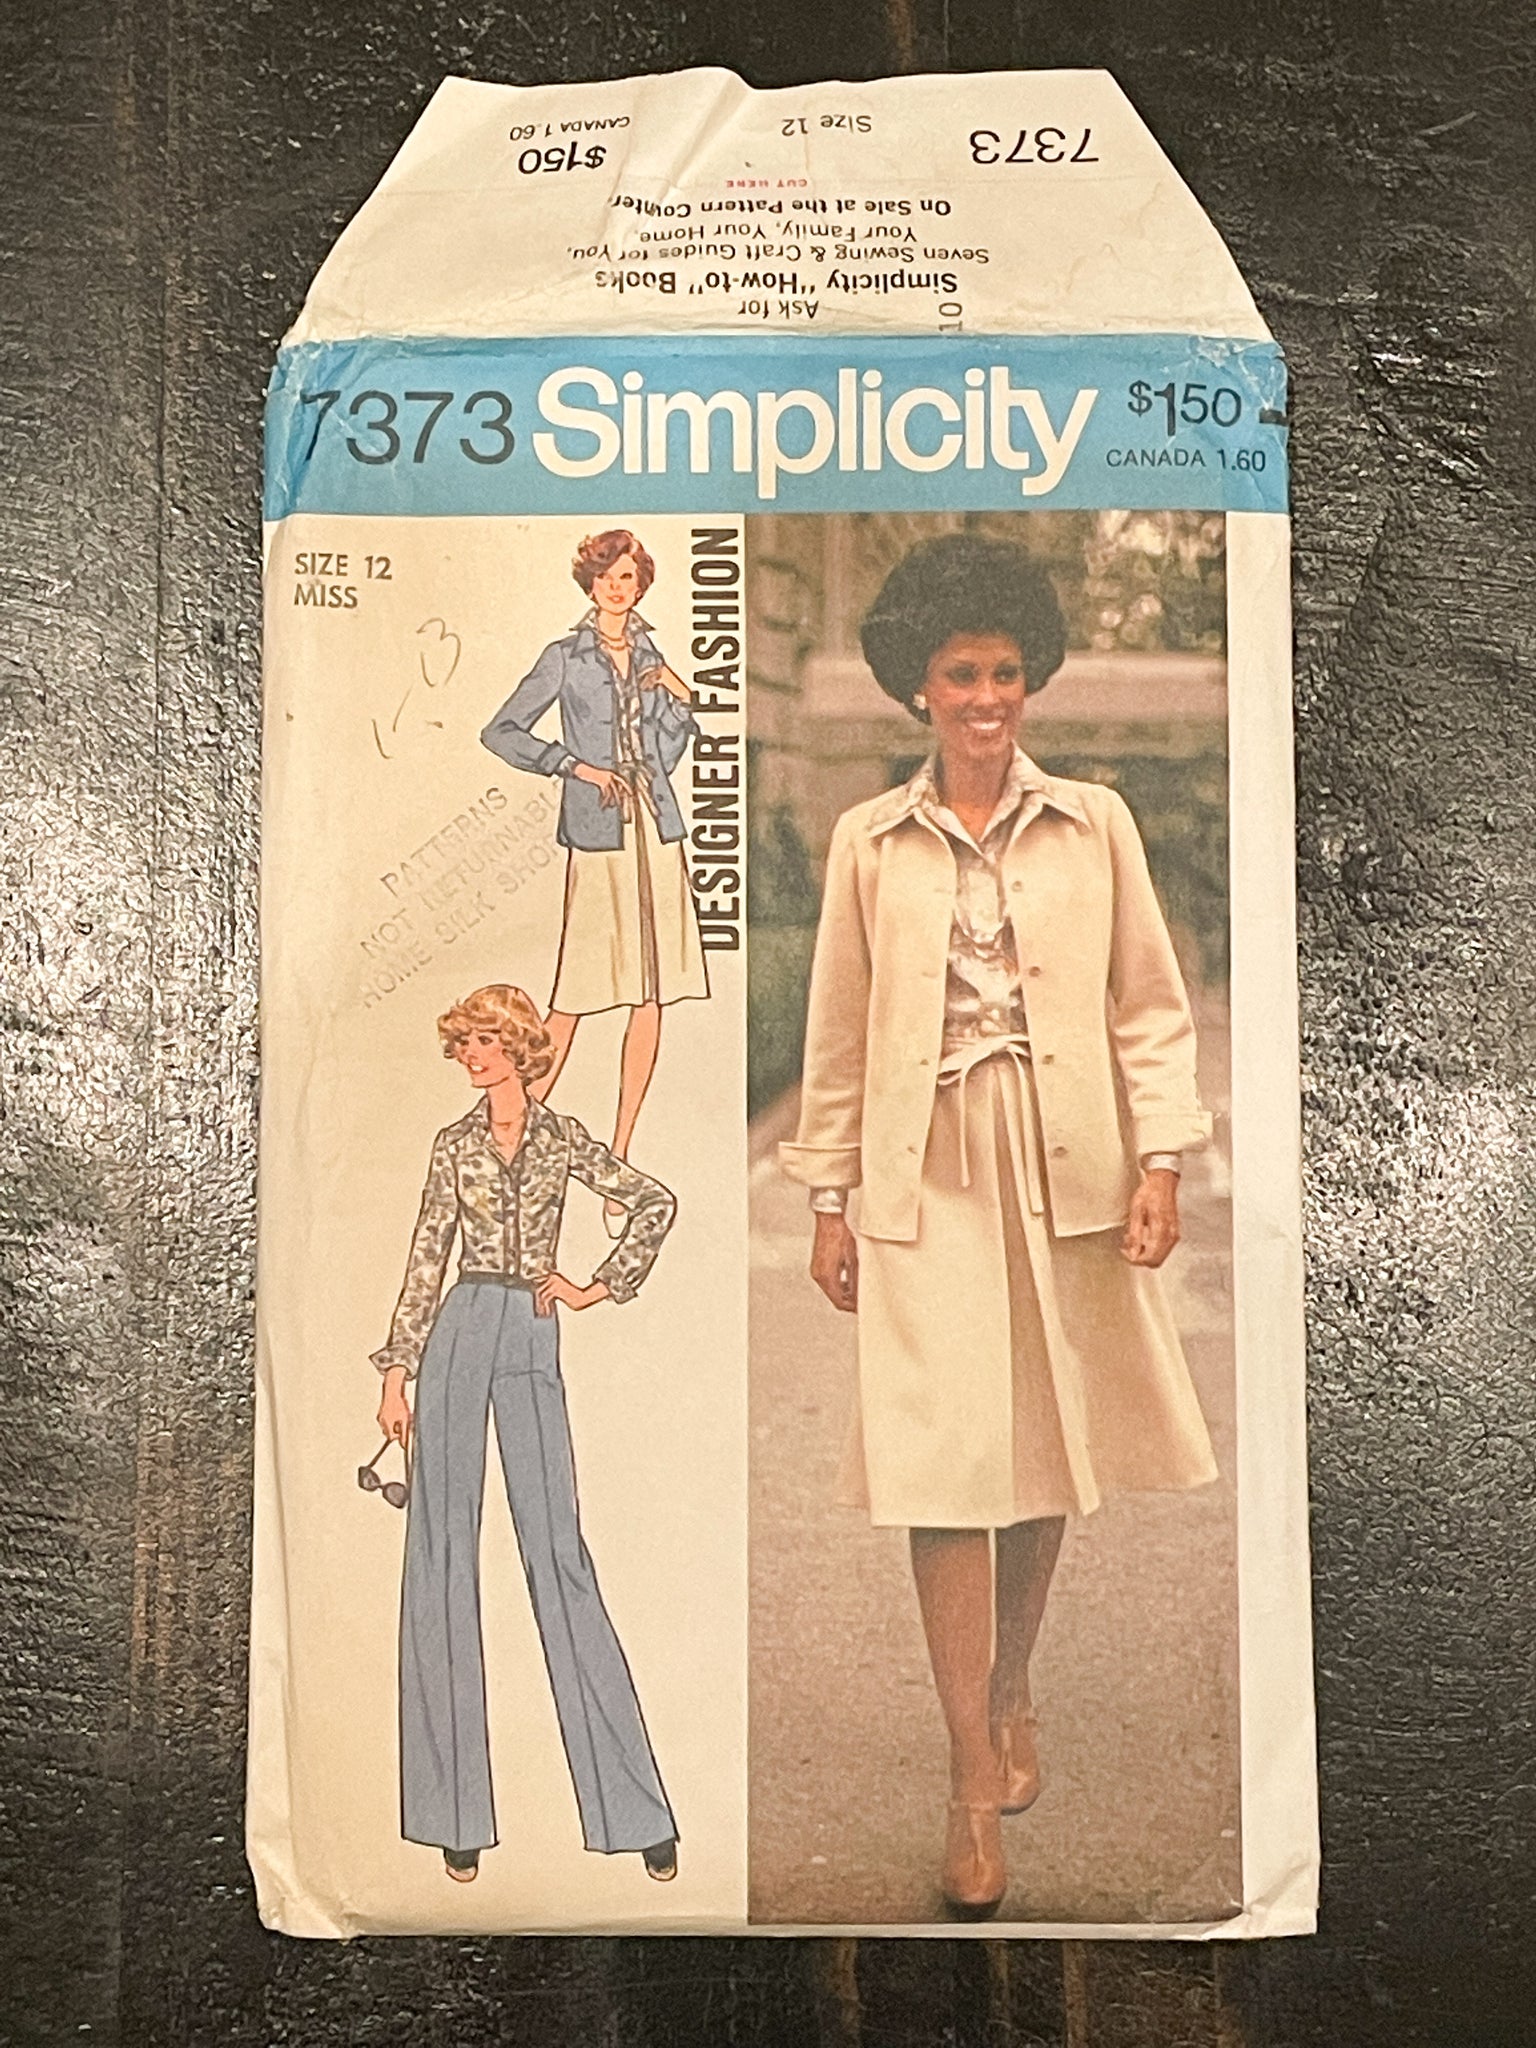 SALE 1976 Simplicity 7373 Pattern - Jacket, Shirt, Skirt and Pants FACTORY FOLDED